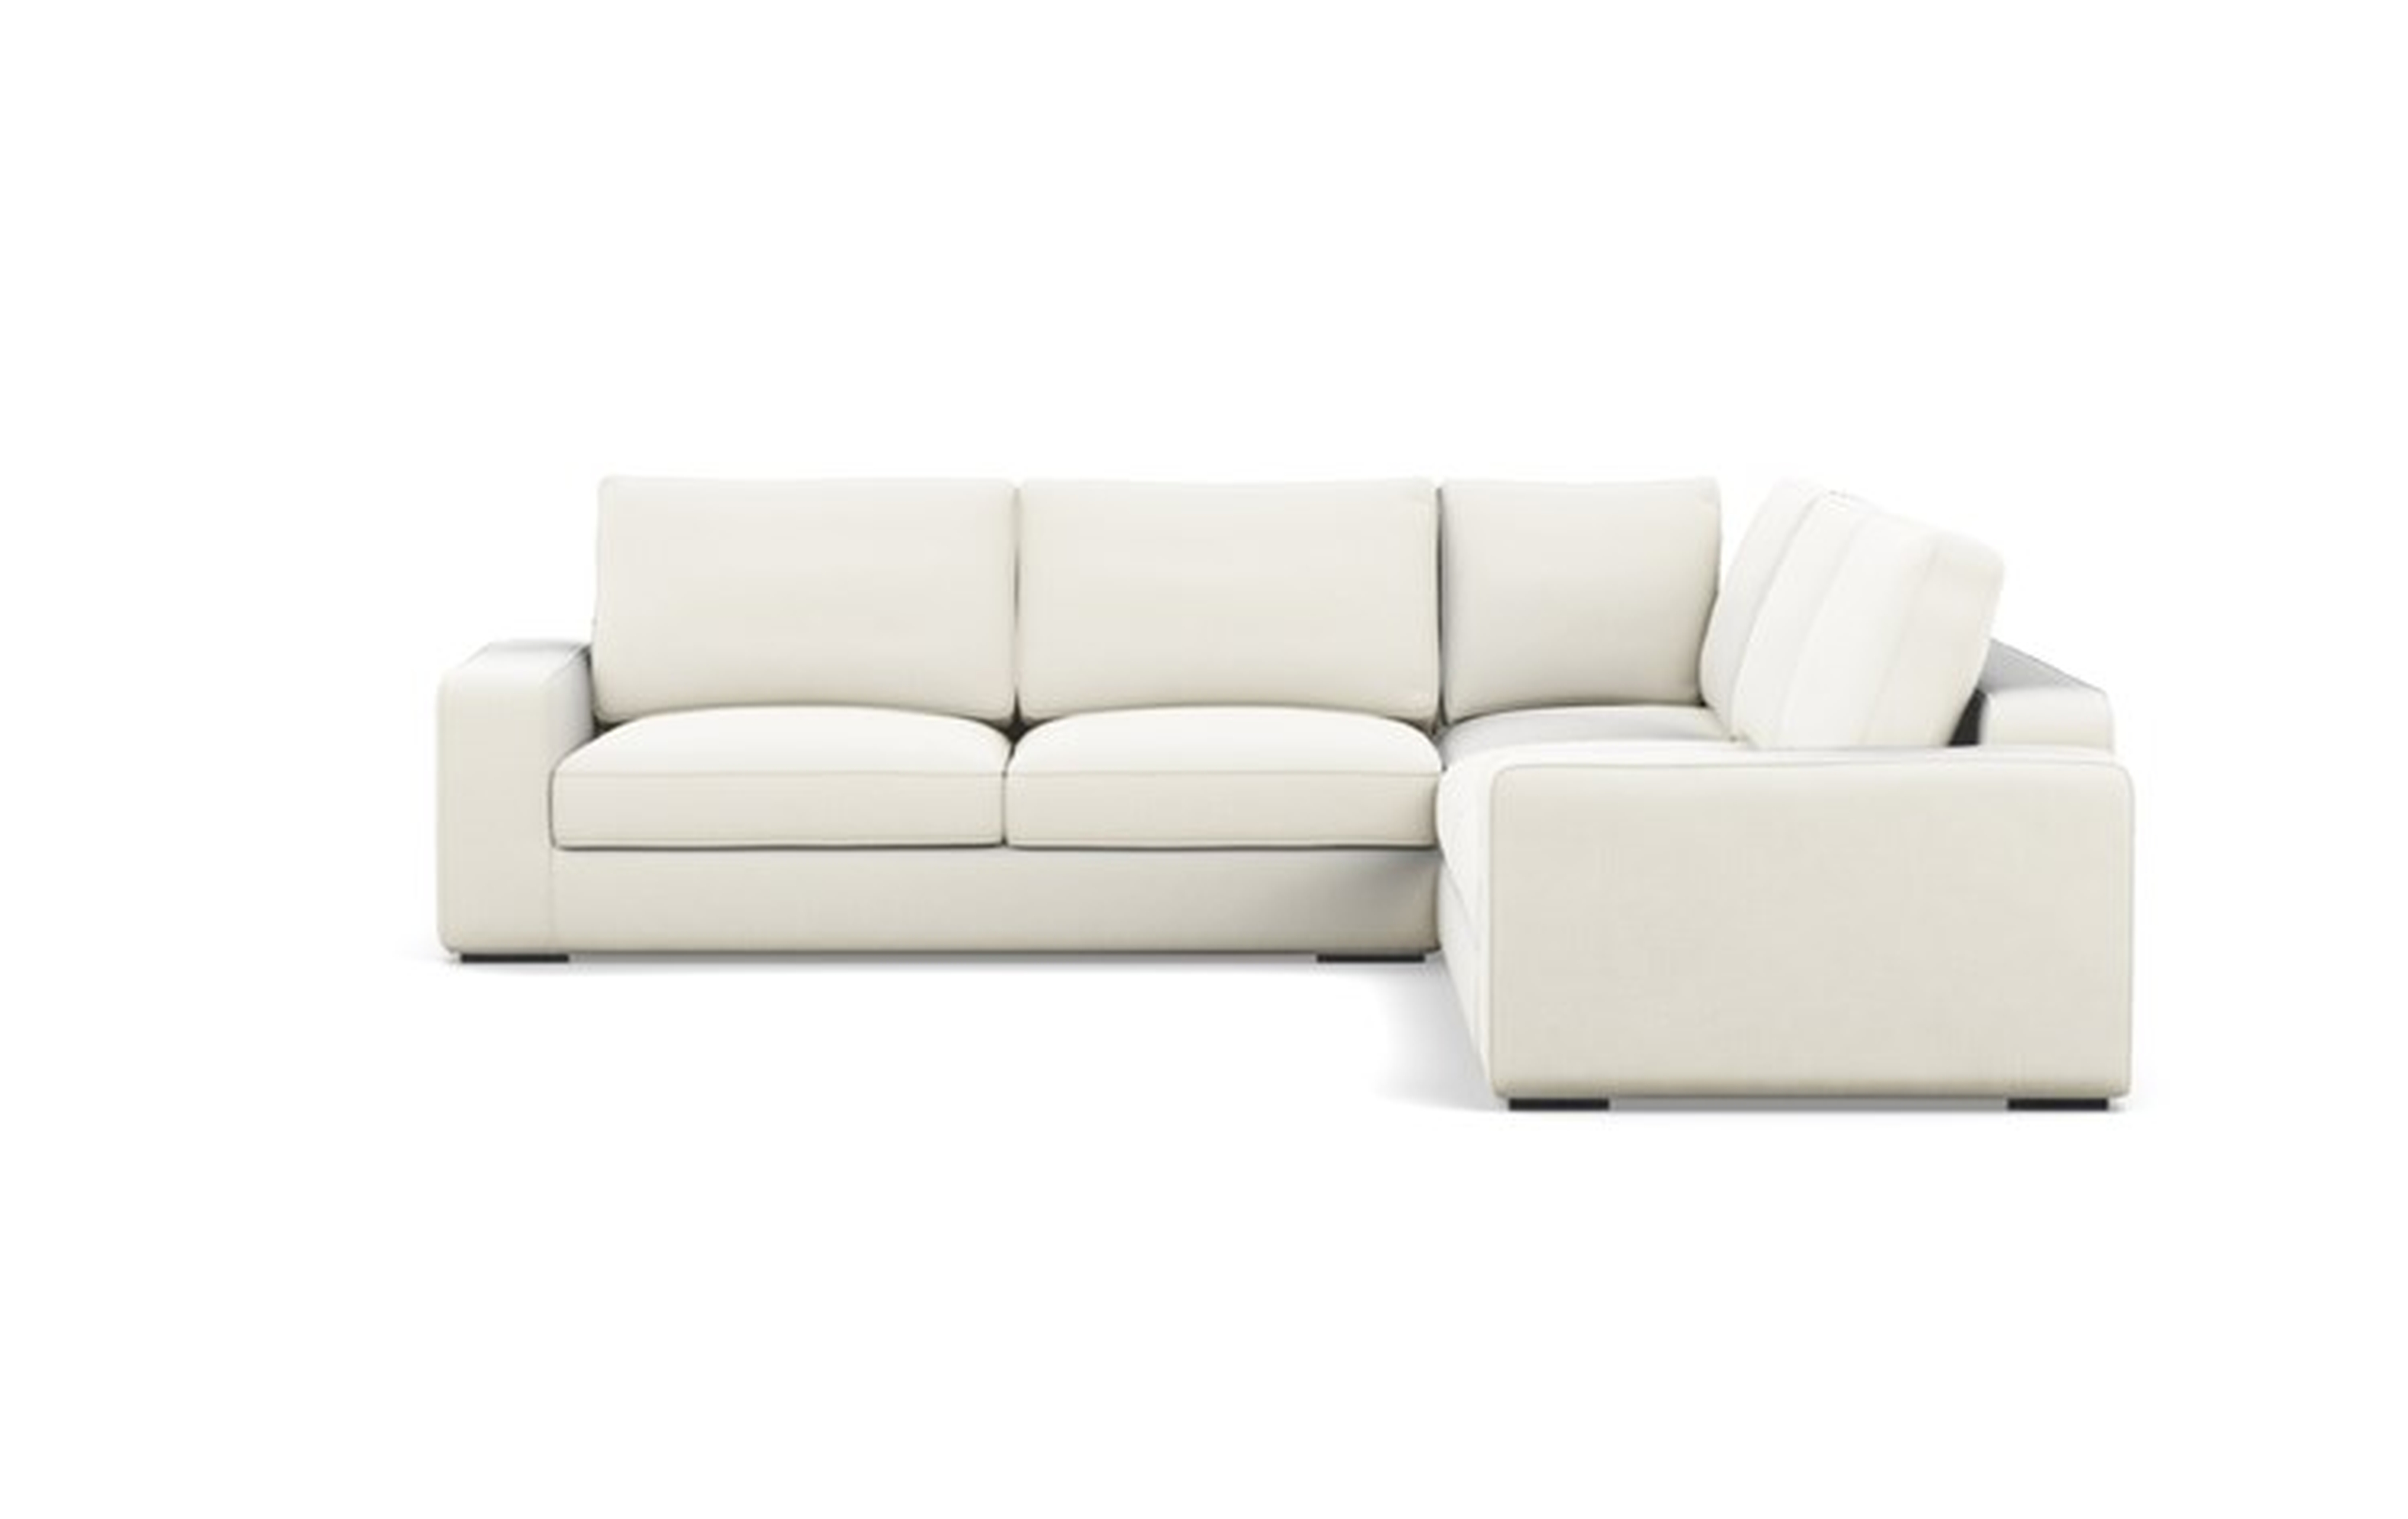 Ainsley Corner Sectional with DECIDE LATER Fabric and Matte Black legs - Interior Define